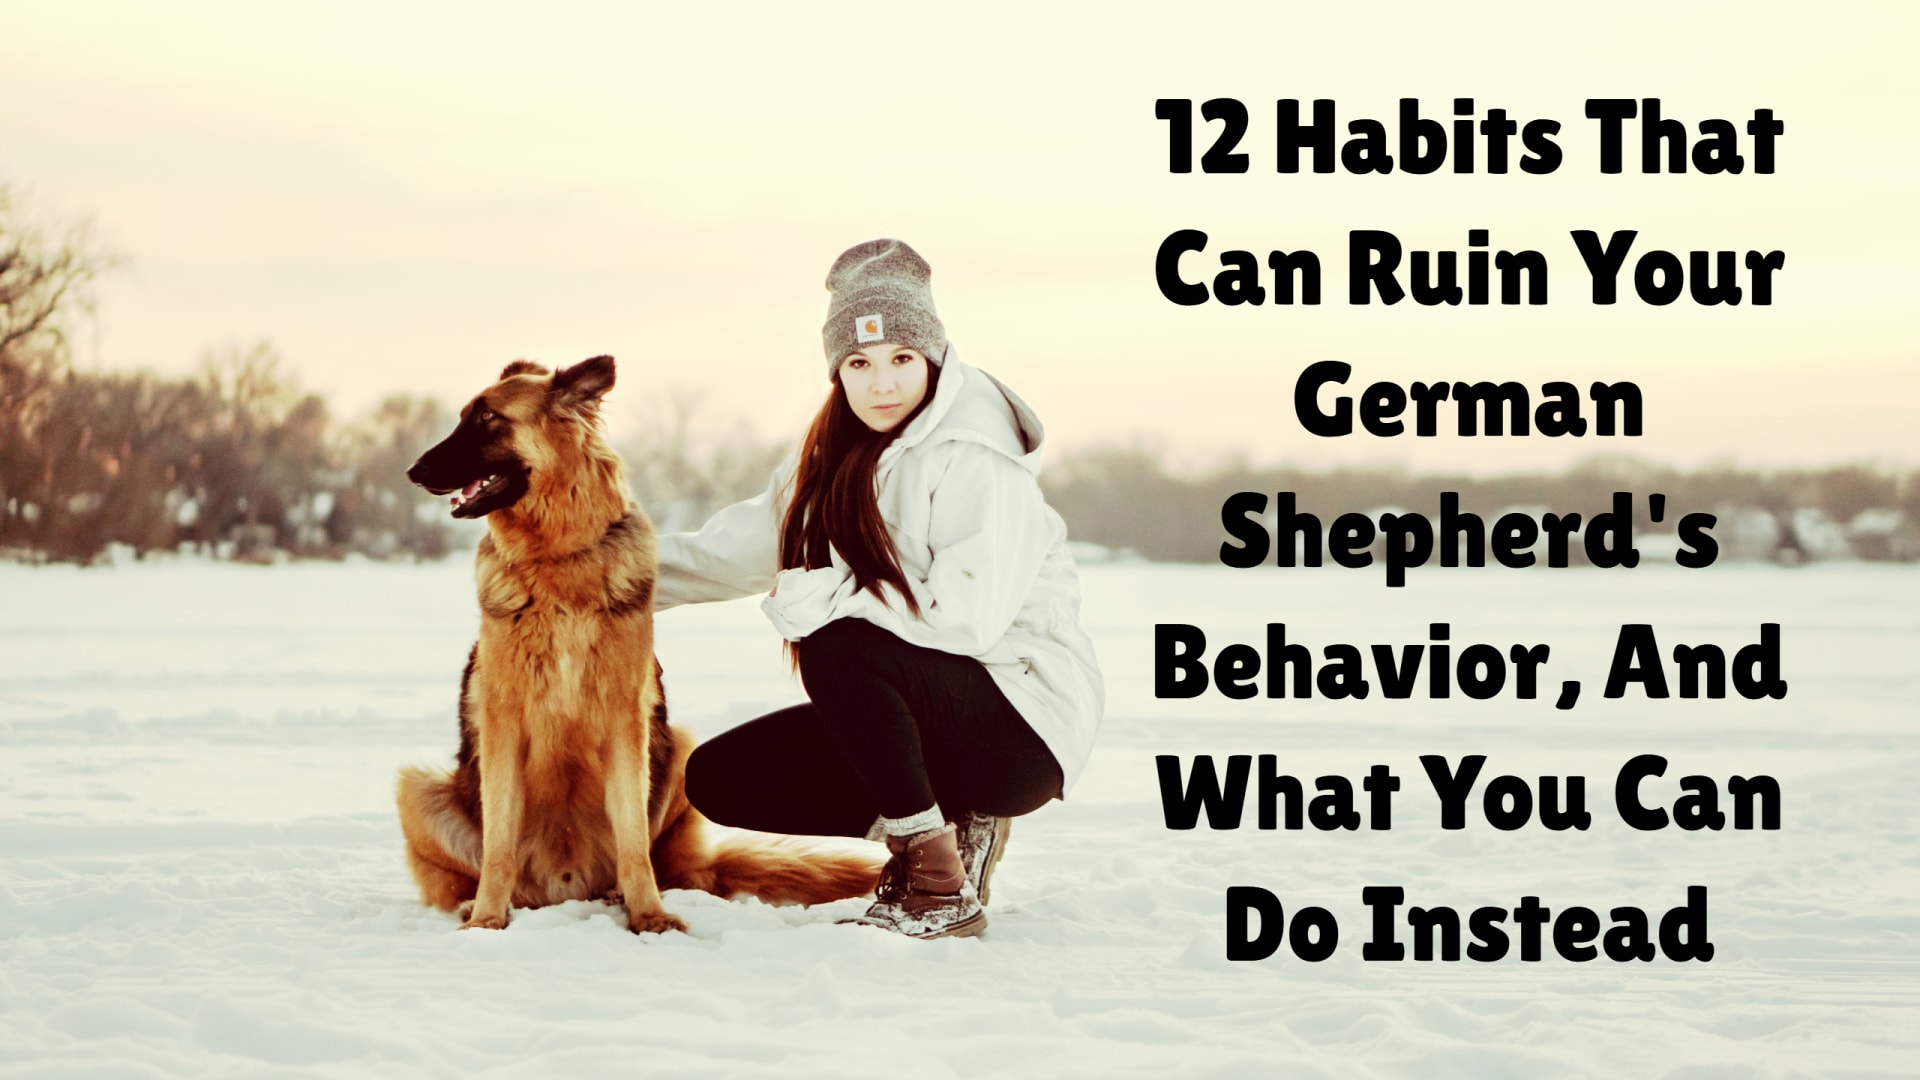 12 Habits That Can Ruin Your German Shepherd's Behavior, And What You Can Do Instead